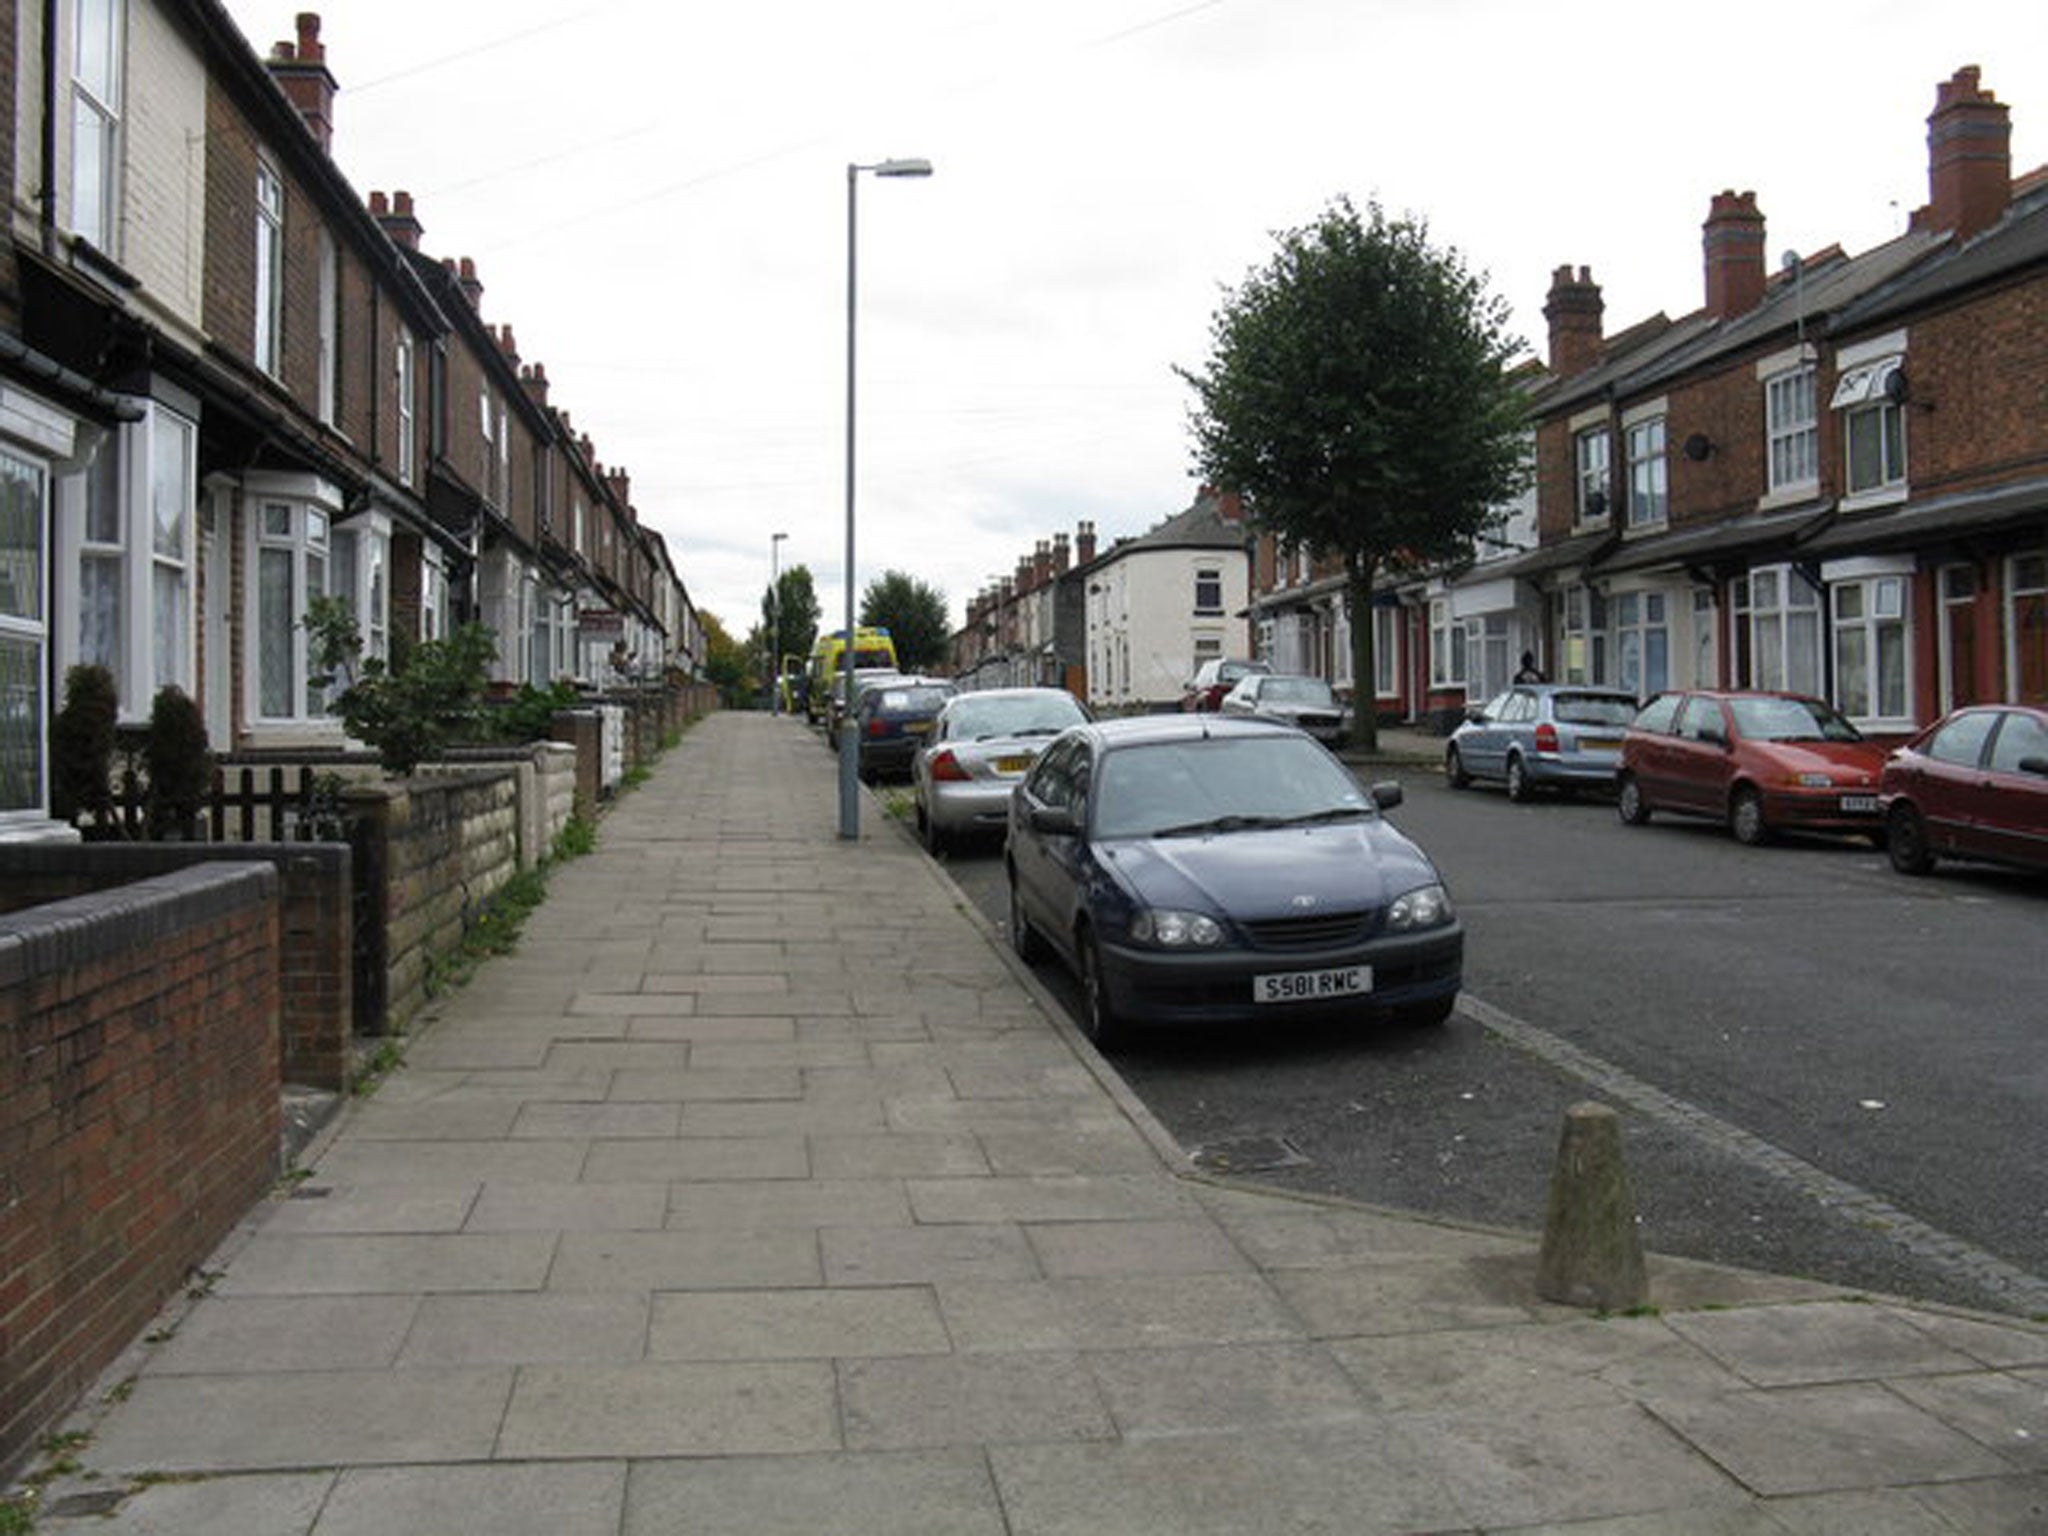 James Turner Street in Birmingham, the setting for Channel 4's documentary series 'Benefits Street'